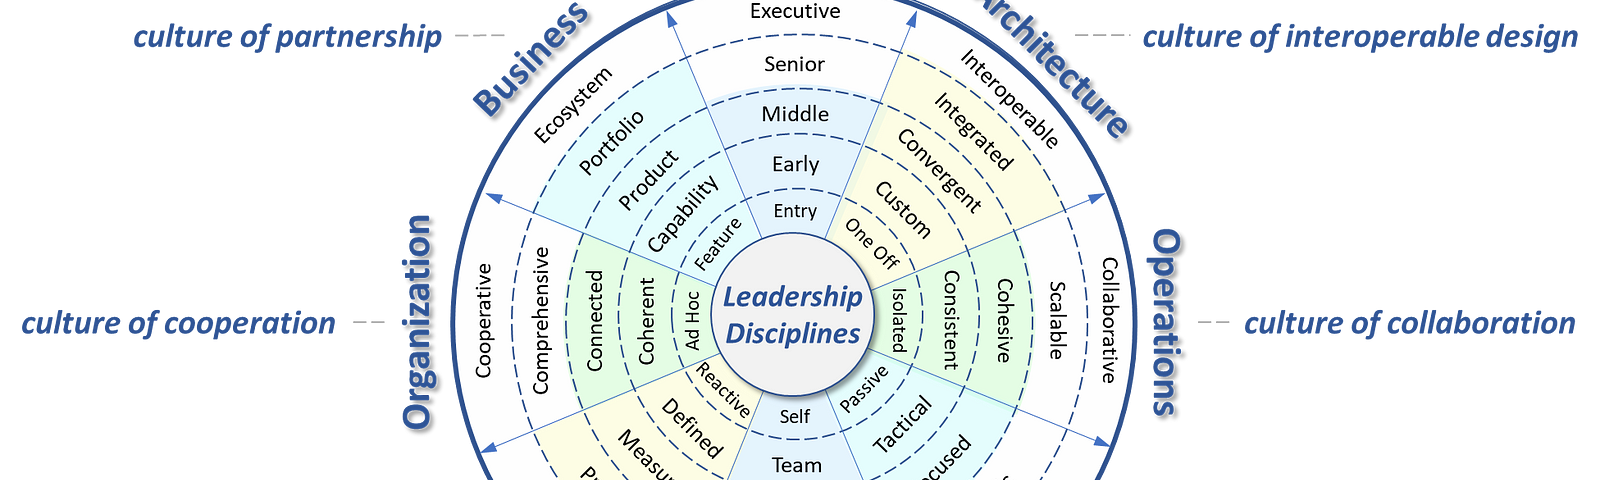 Rating scale for leadership disciplines. Five concentric rings with increased leadership abilities across eight different areas.